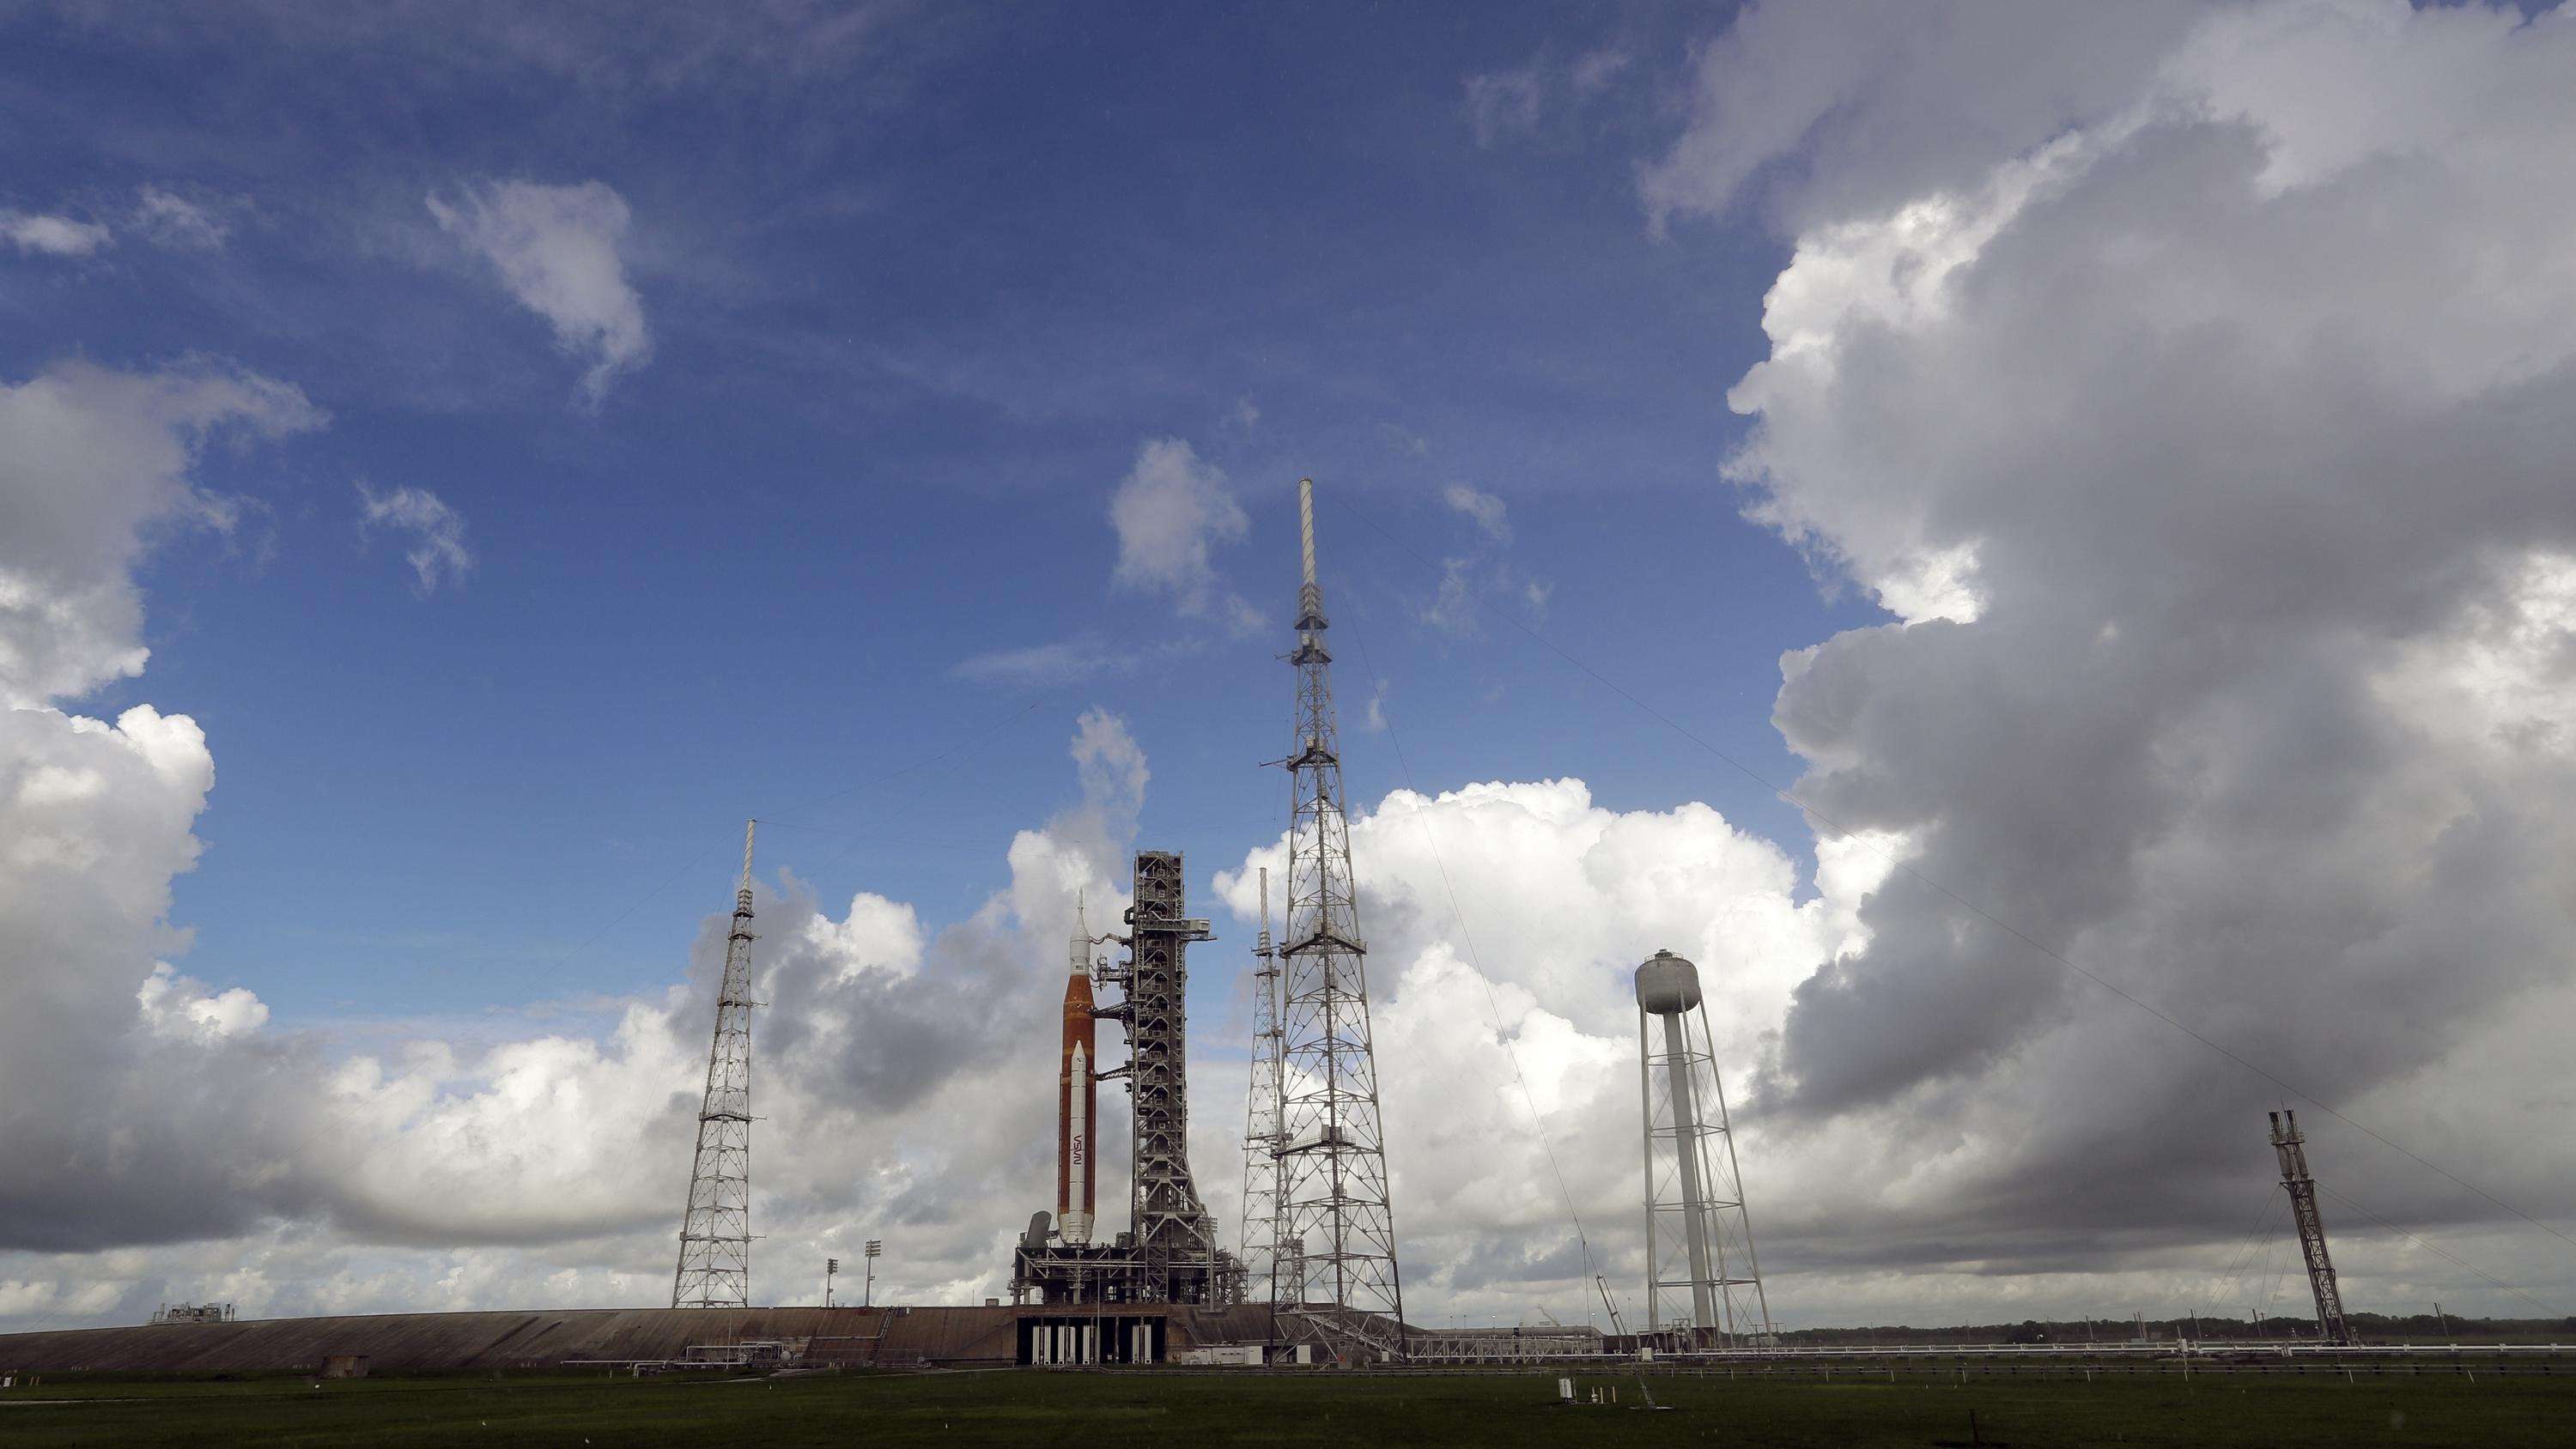 image for NASA scrubs launch of new moon rocket after engine problem